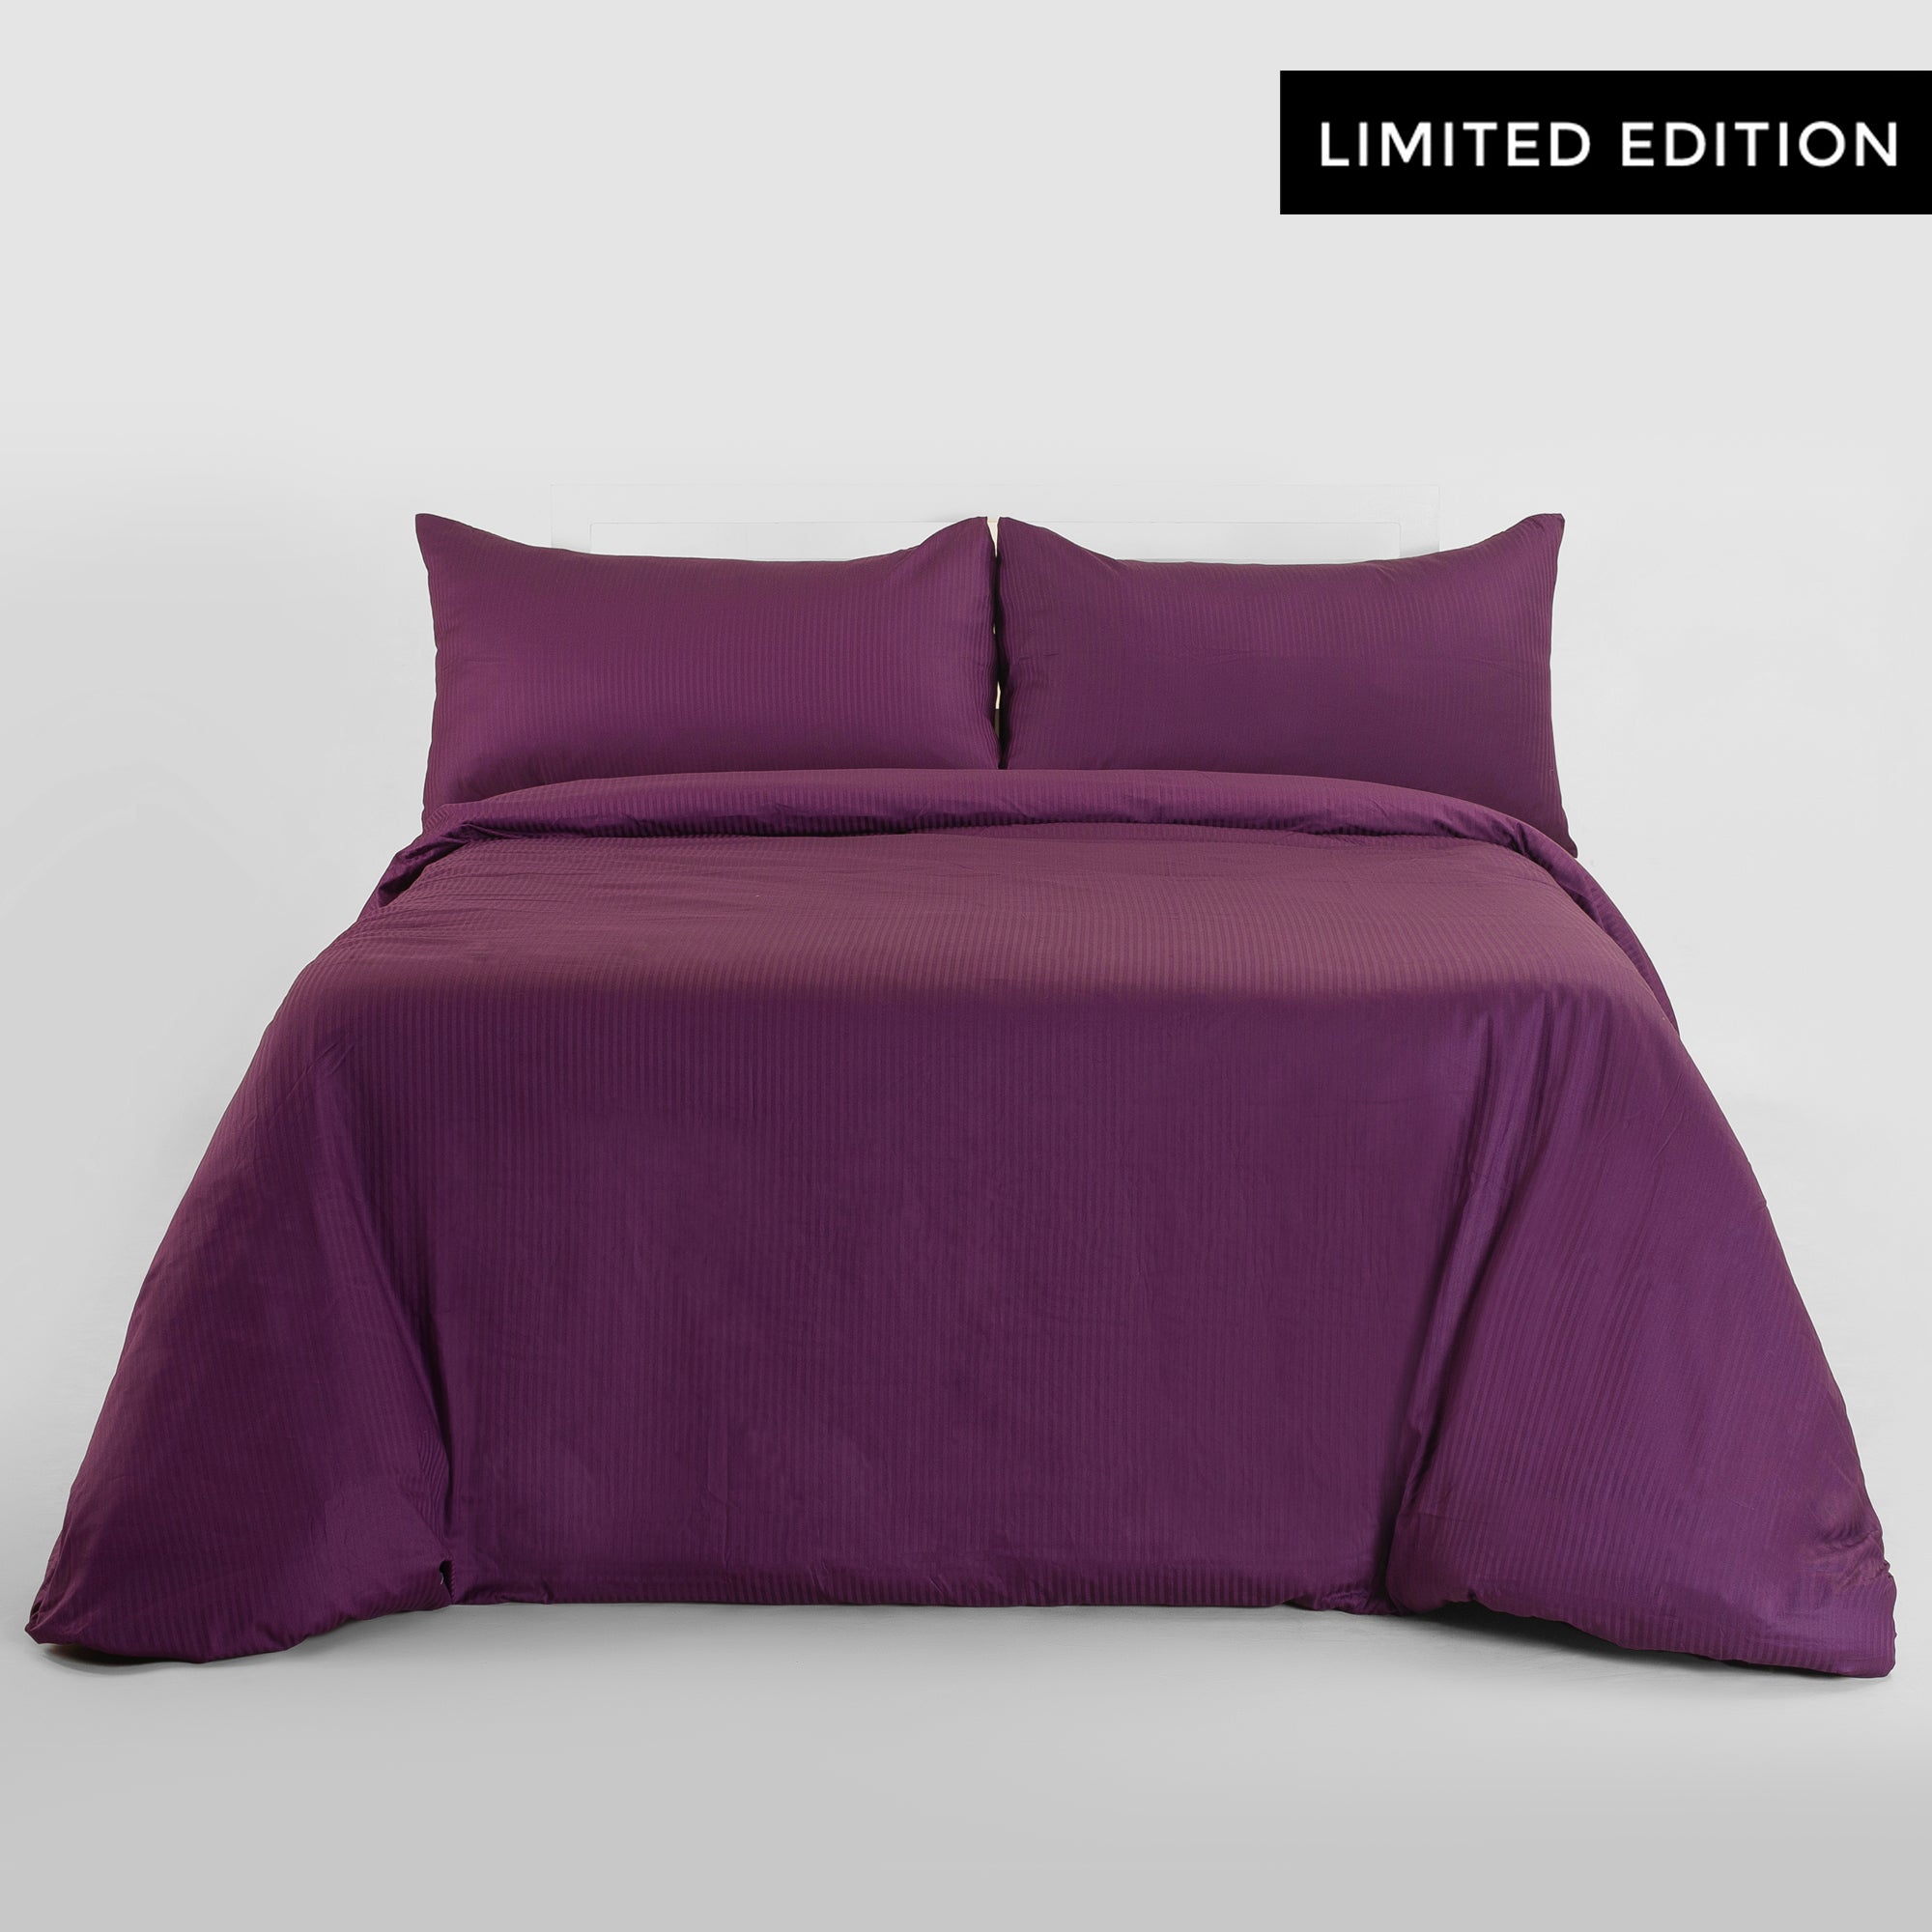 The Linen Company Bedding King Wildberry Duvet Cover Set